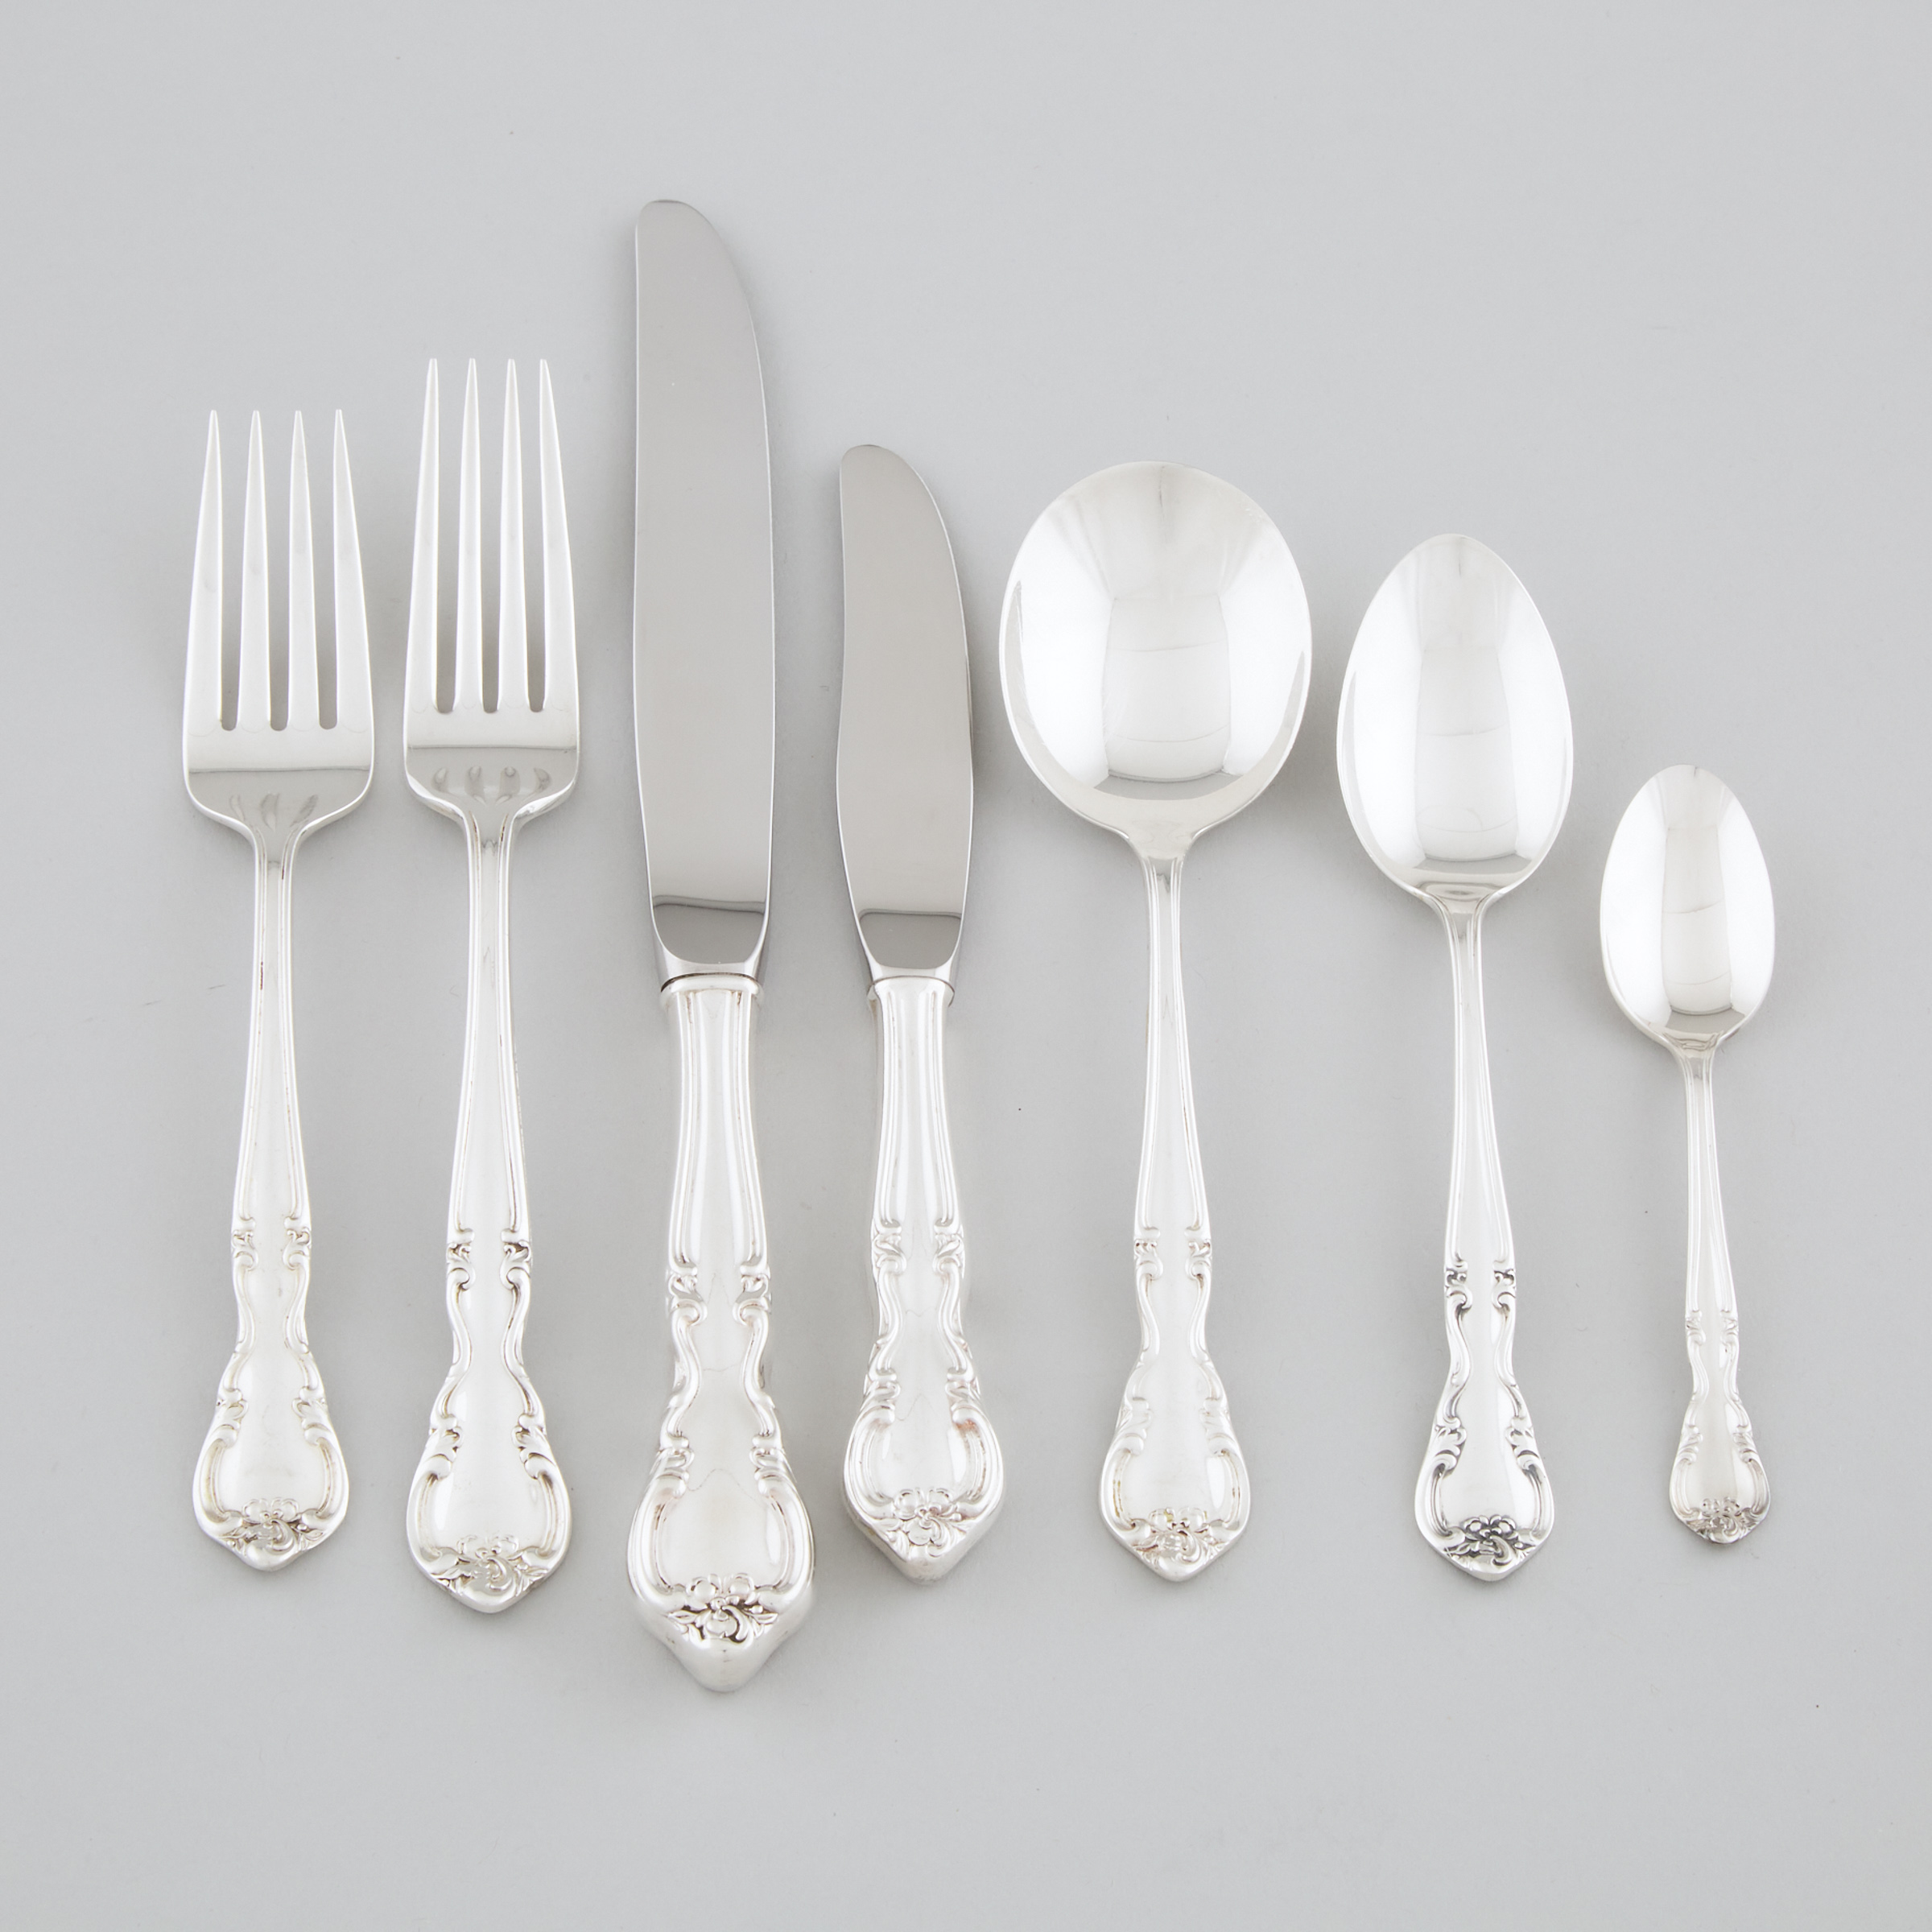 American Silver ‘Canadian Classic’ Pattern Flatware Service, Easterling Co., Chicago, Ill., mid-20th century